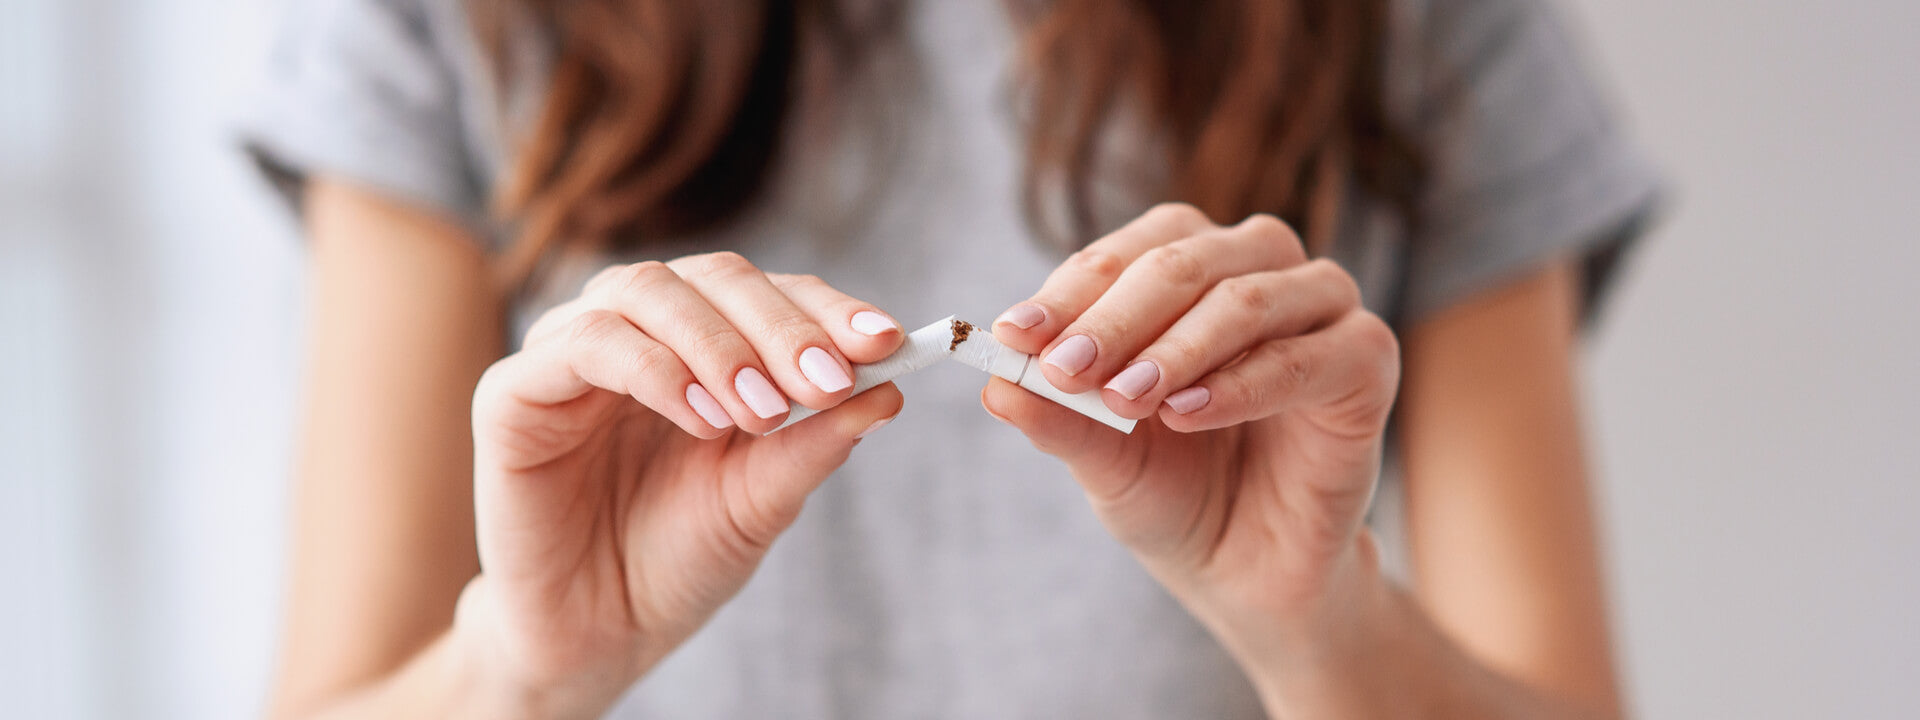 Starting in the New Year - What To Do After You Have Quit Smoking